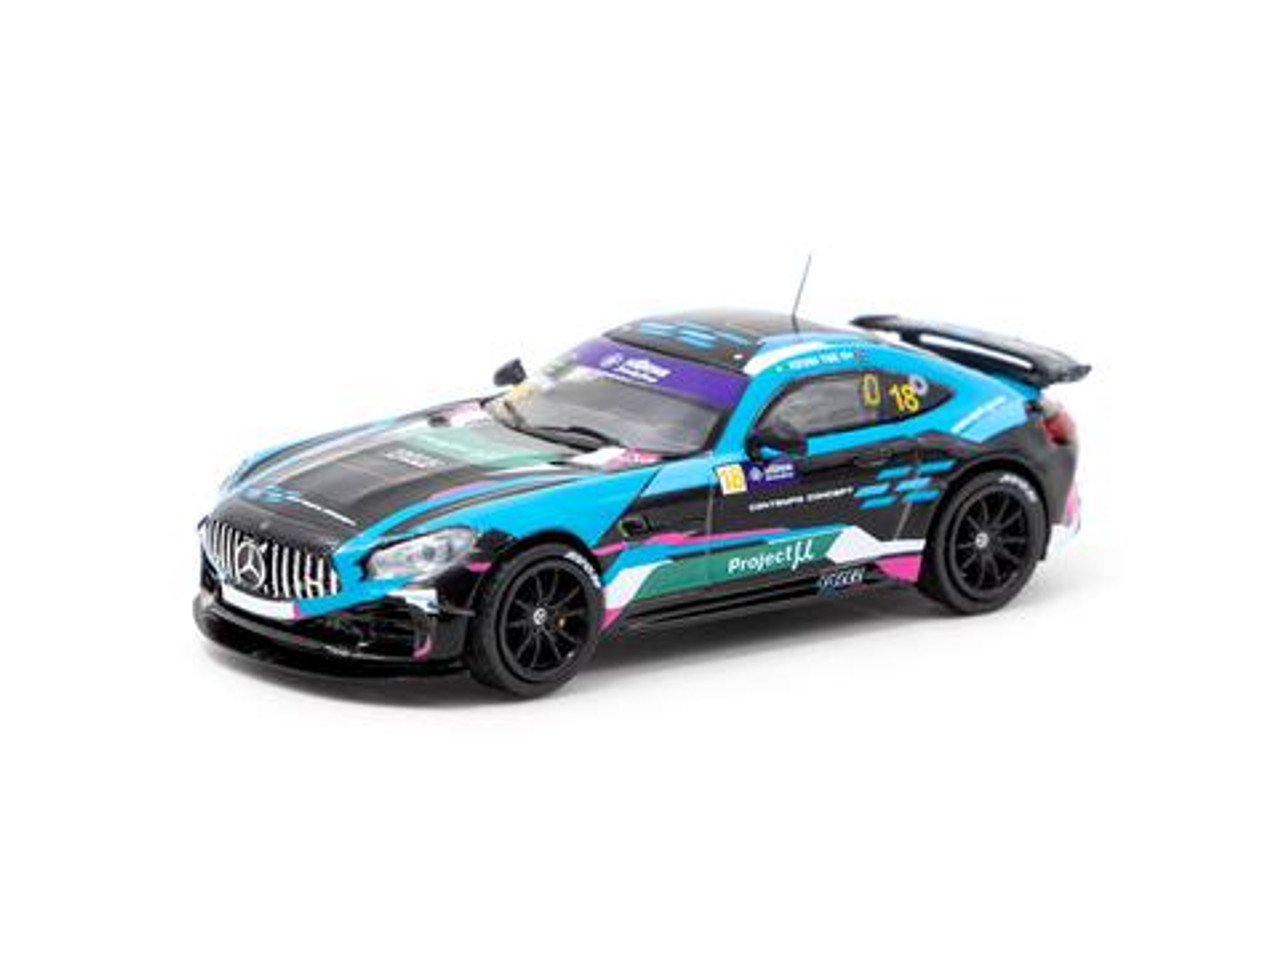 Tarmac Works 1:64 Hobby64 - Mercedes-AMG GT4 - Greater Bay Area GT Cup Macau 2019 Winner - Kevin Tse #18 (Black/Blue) Diecast Car Model (Limited to 1248 pieces)